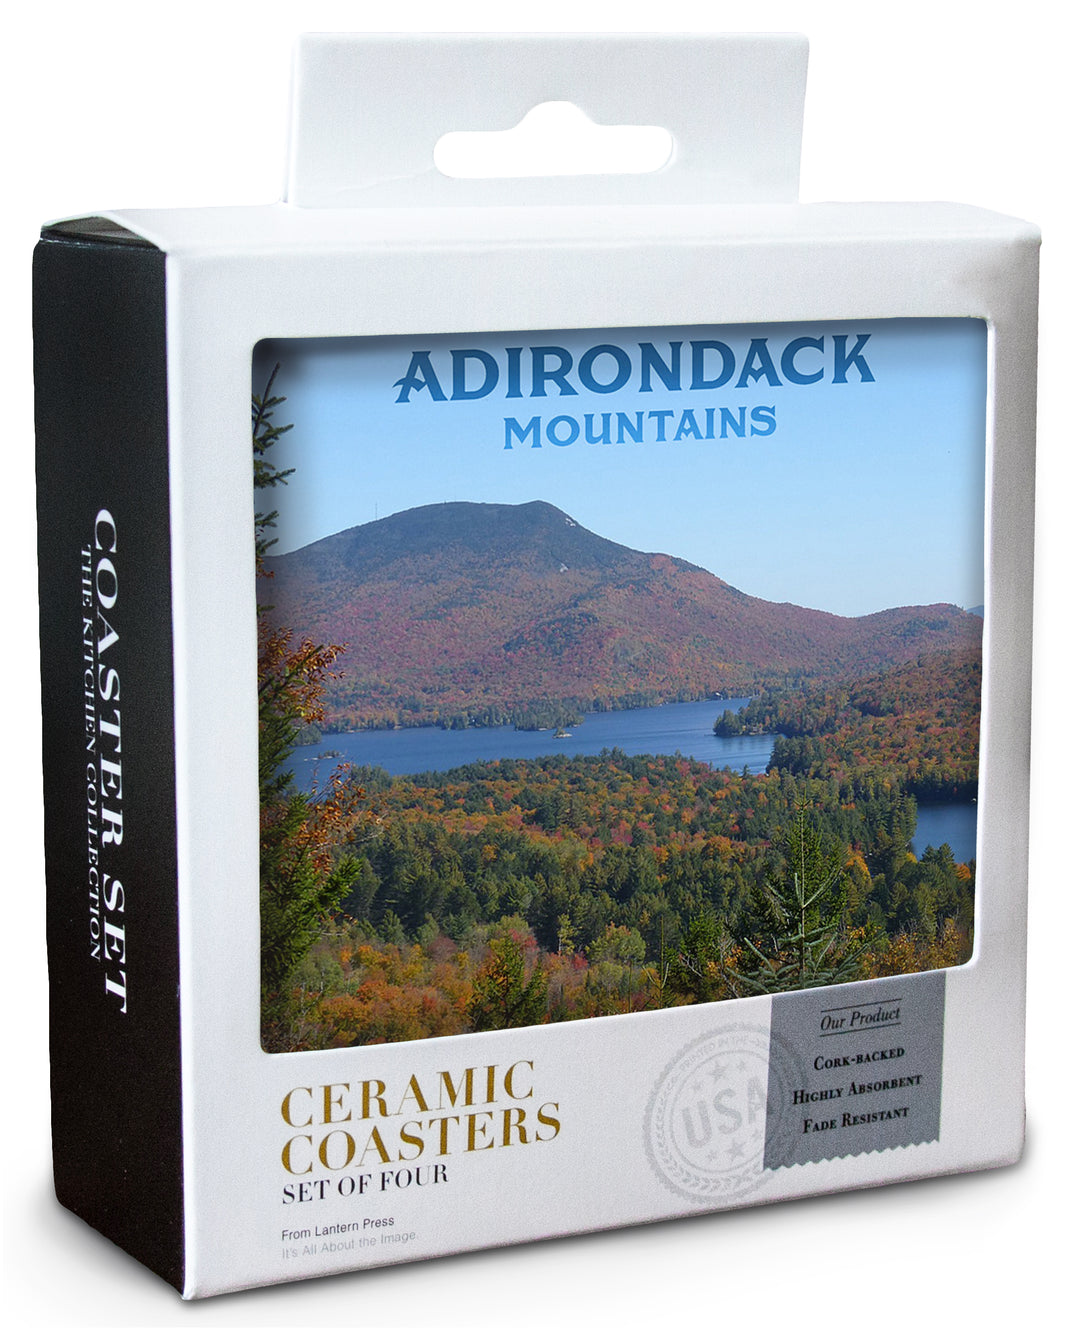 Adirondack Mountains, New York, Forrest and lake in Fall Autumn, Photography, Coaster Set